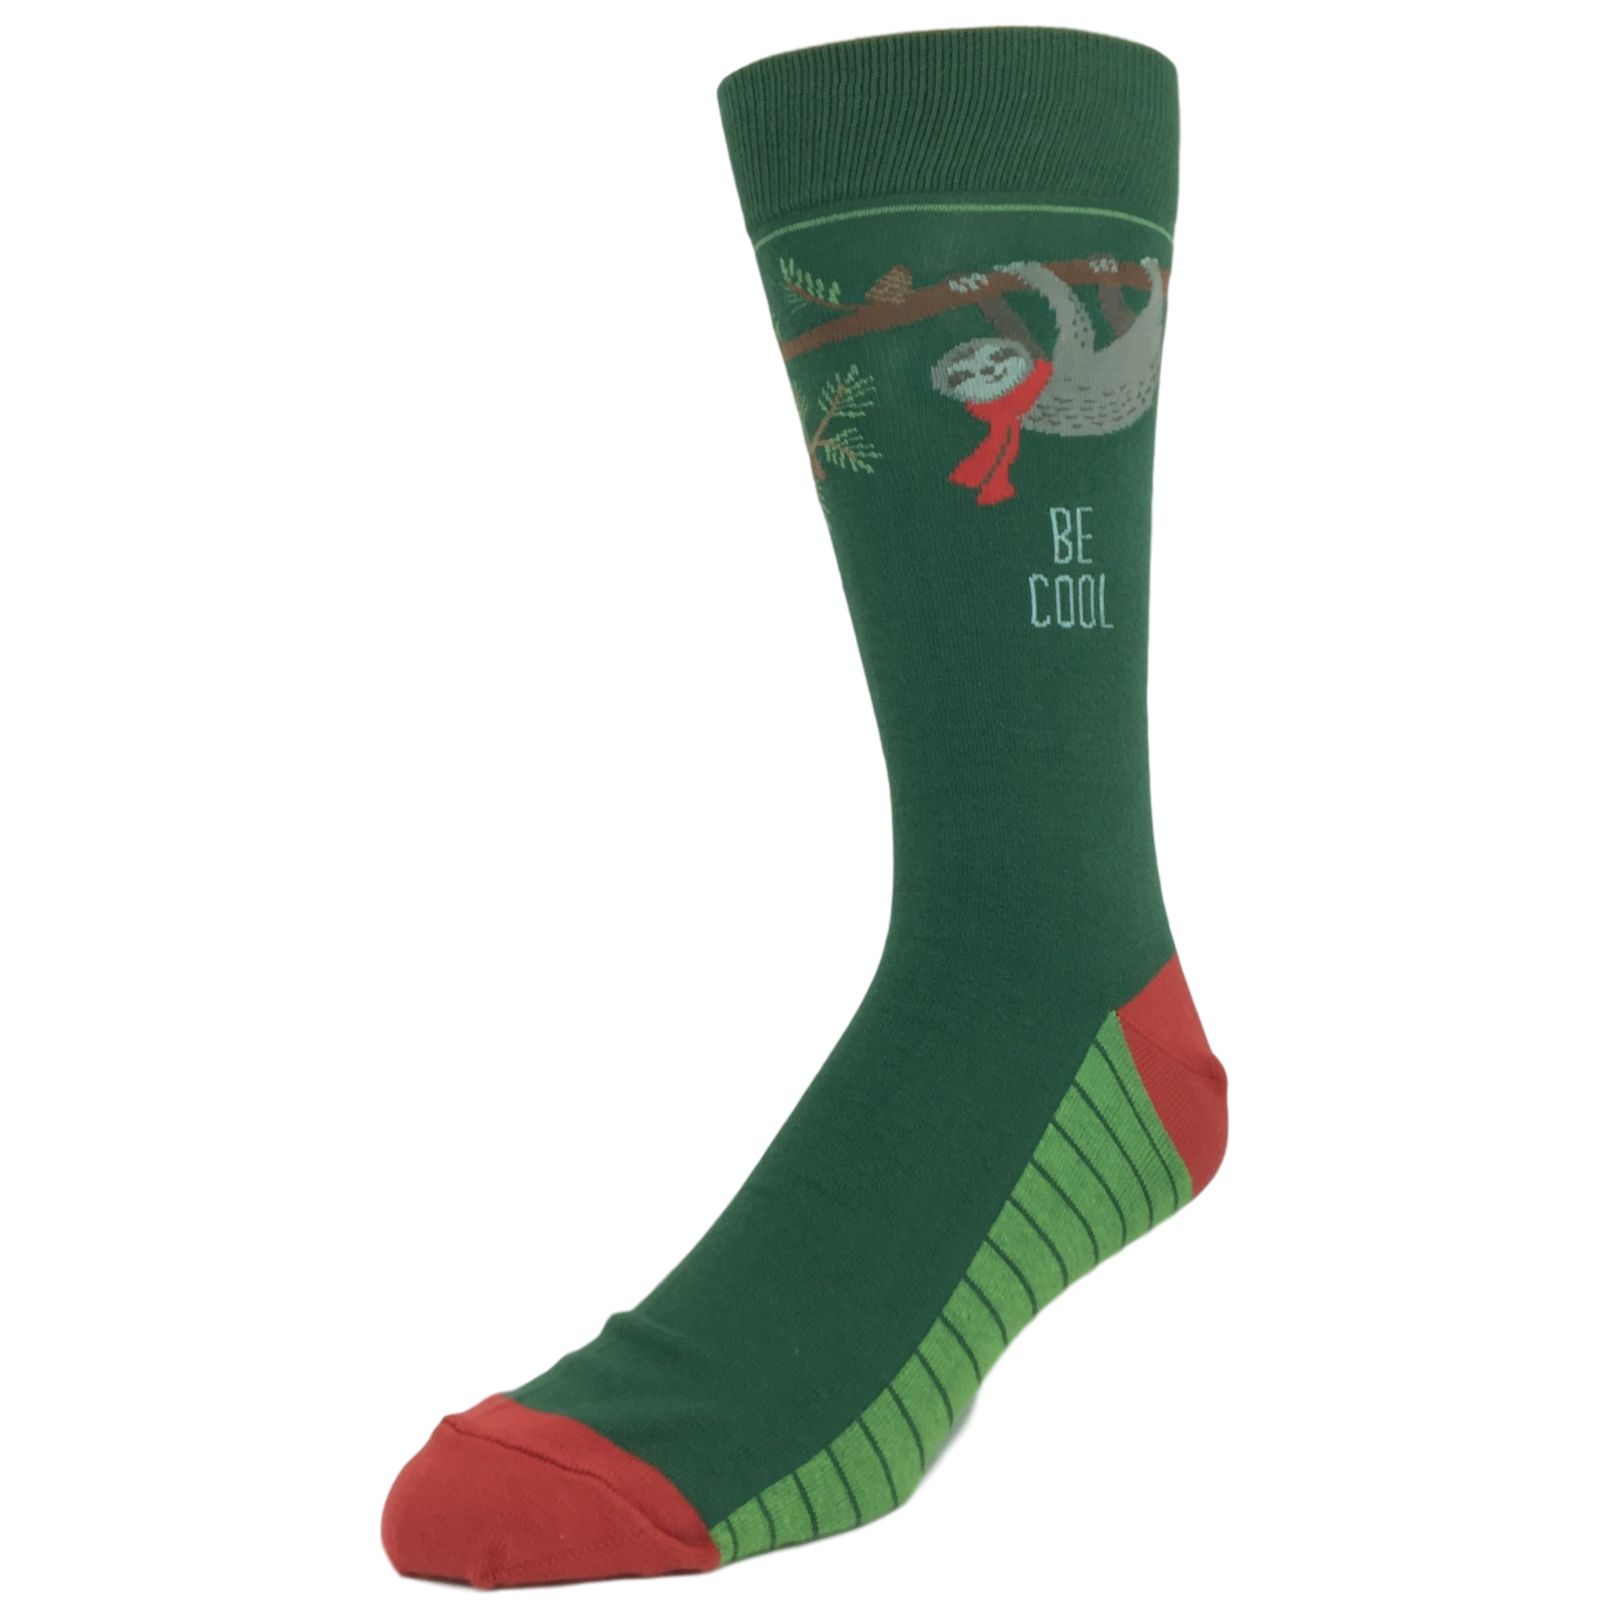 Chill, Be Cool Sloth Christmas Socks by Foot Traffic